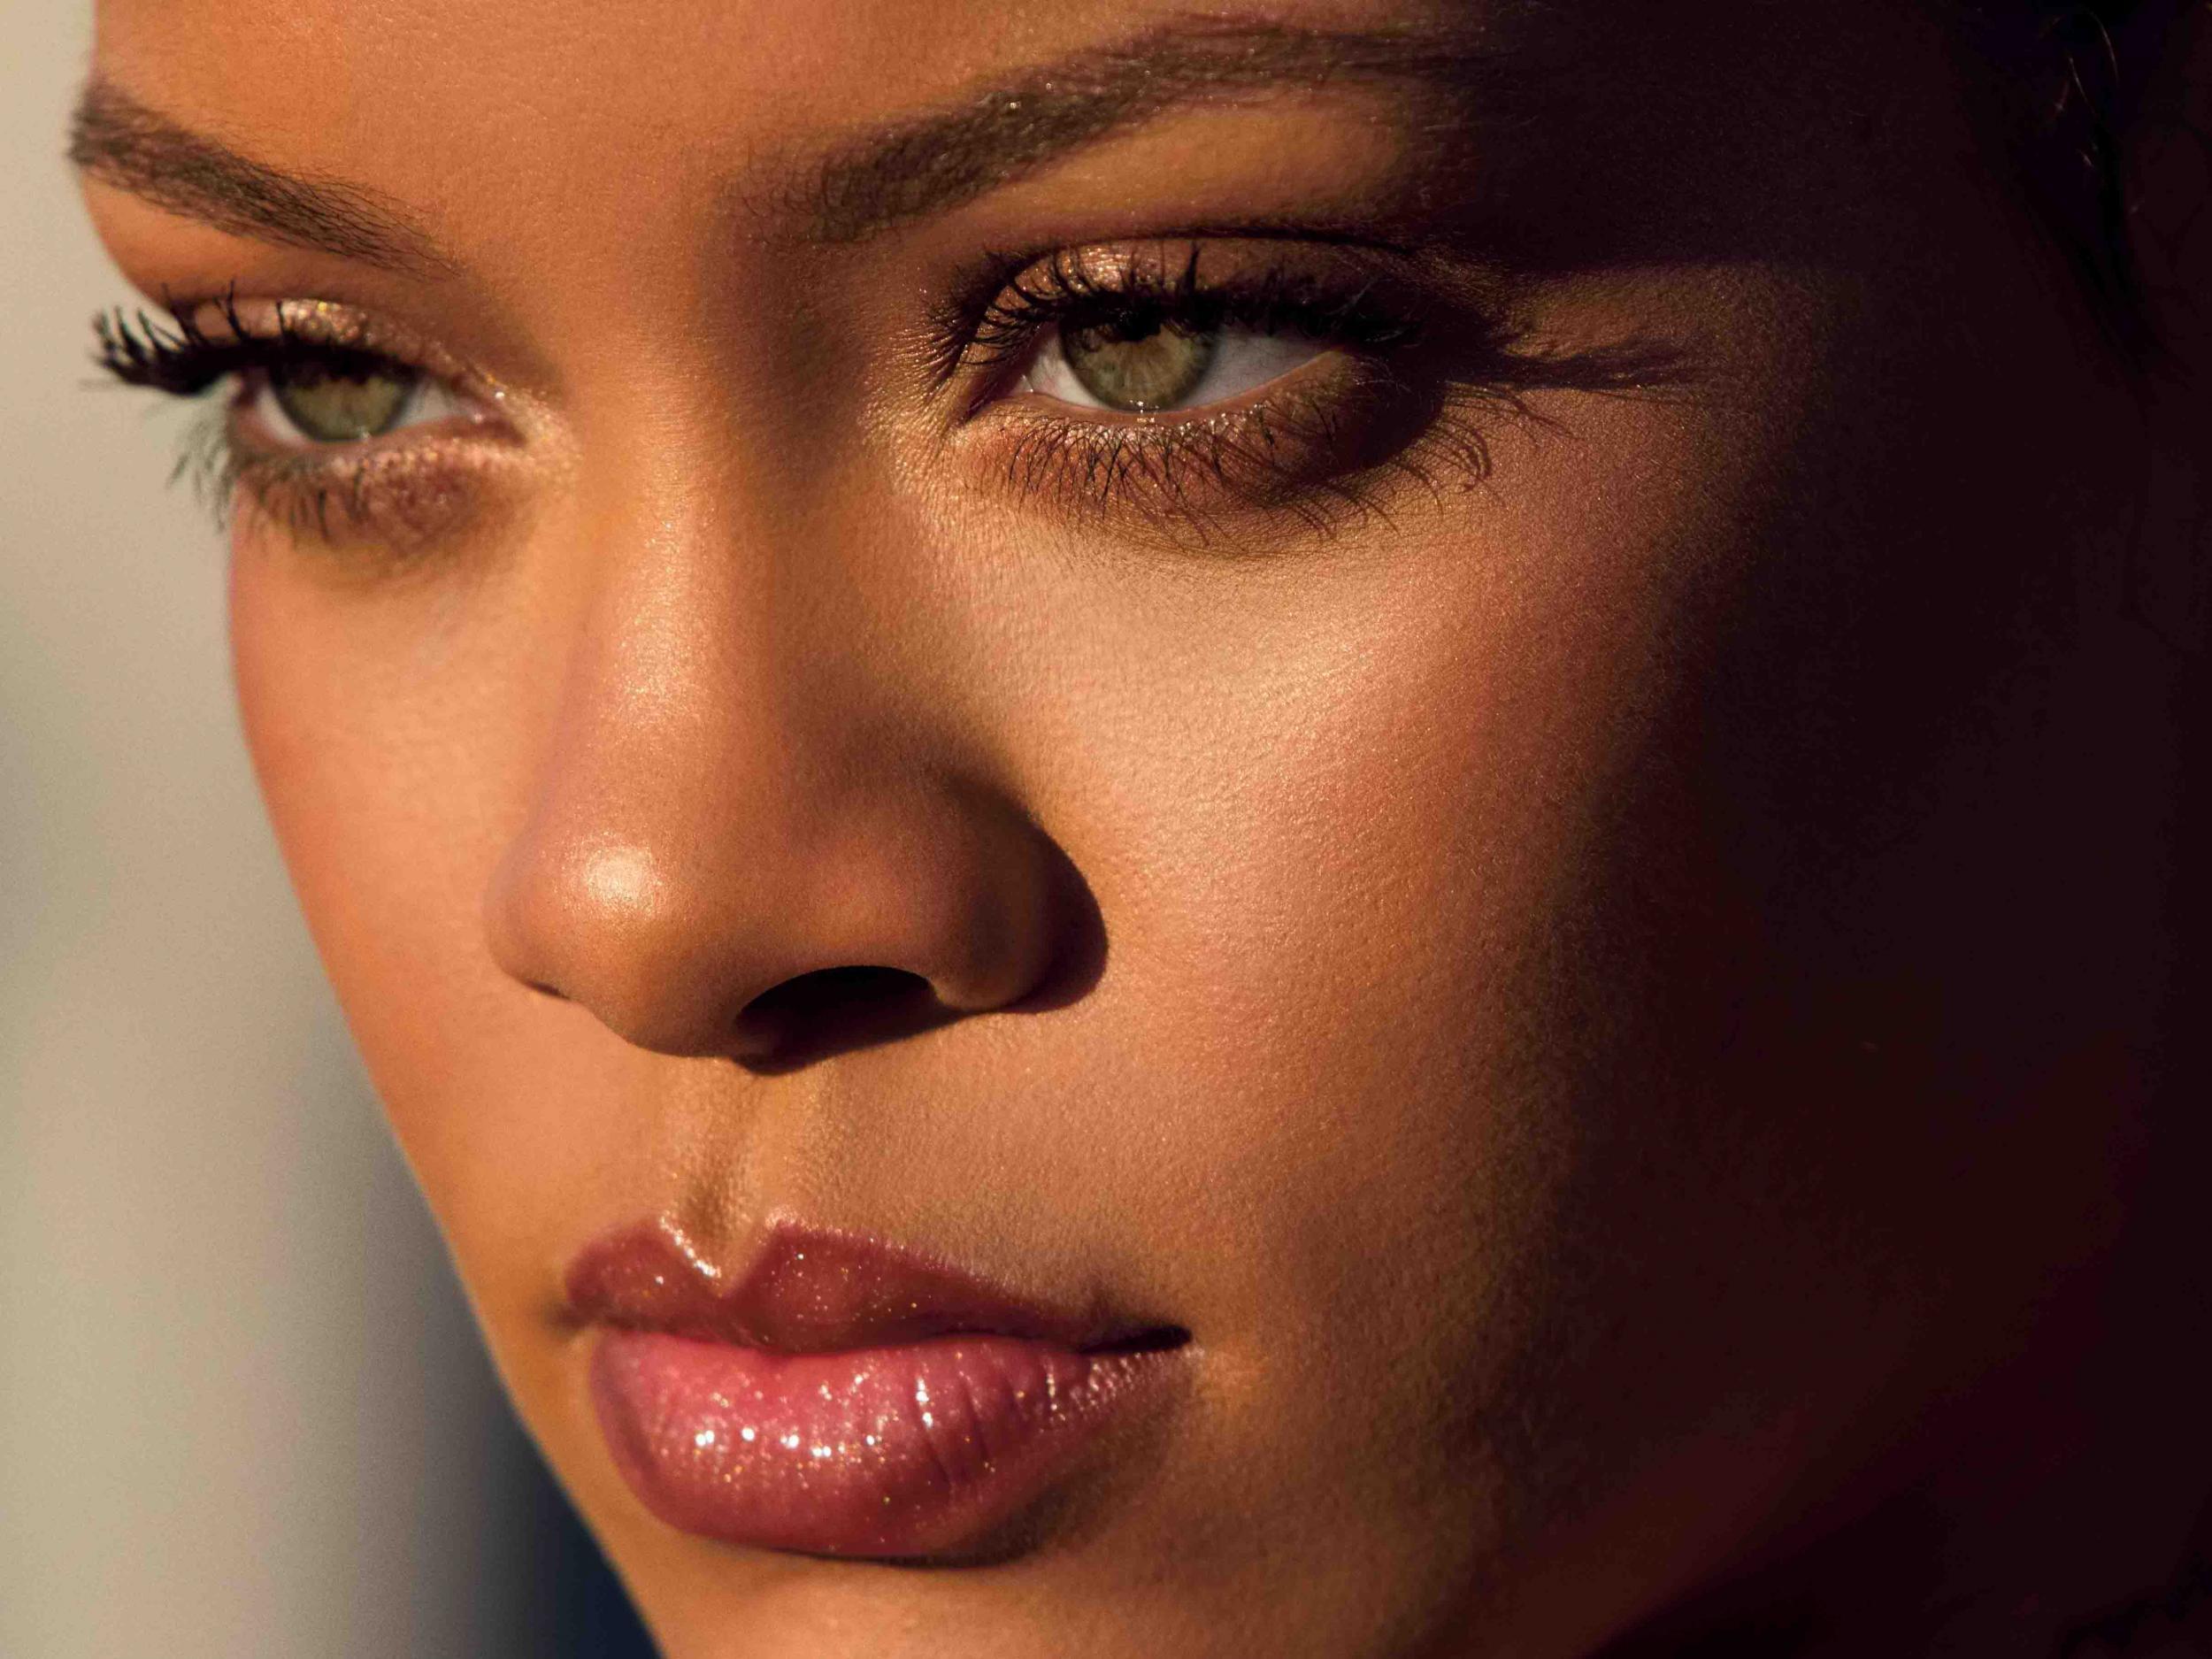 Most Popular Fenty Beauty by Rihanna Makeup Products